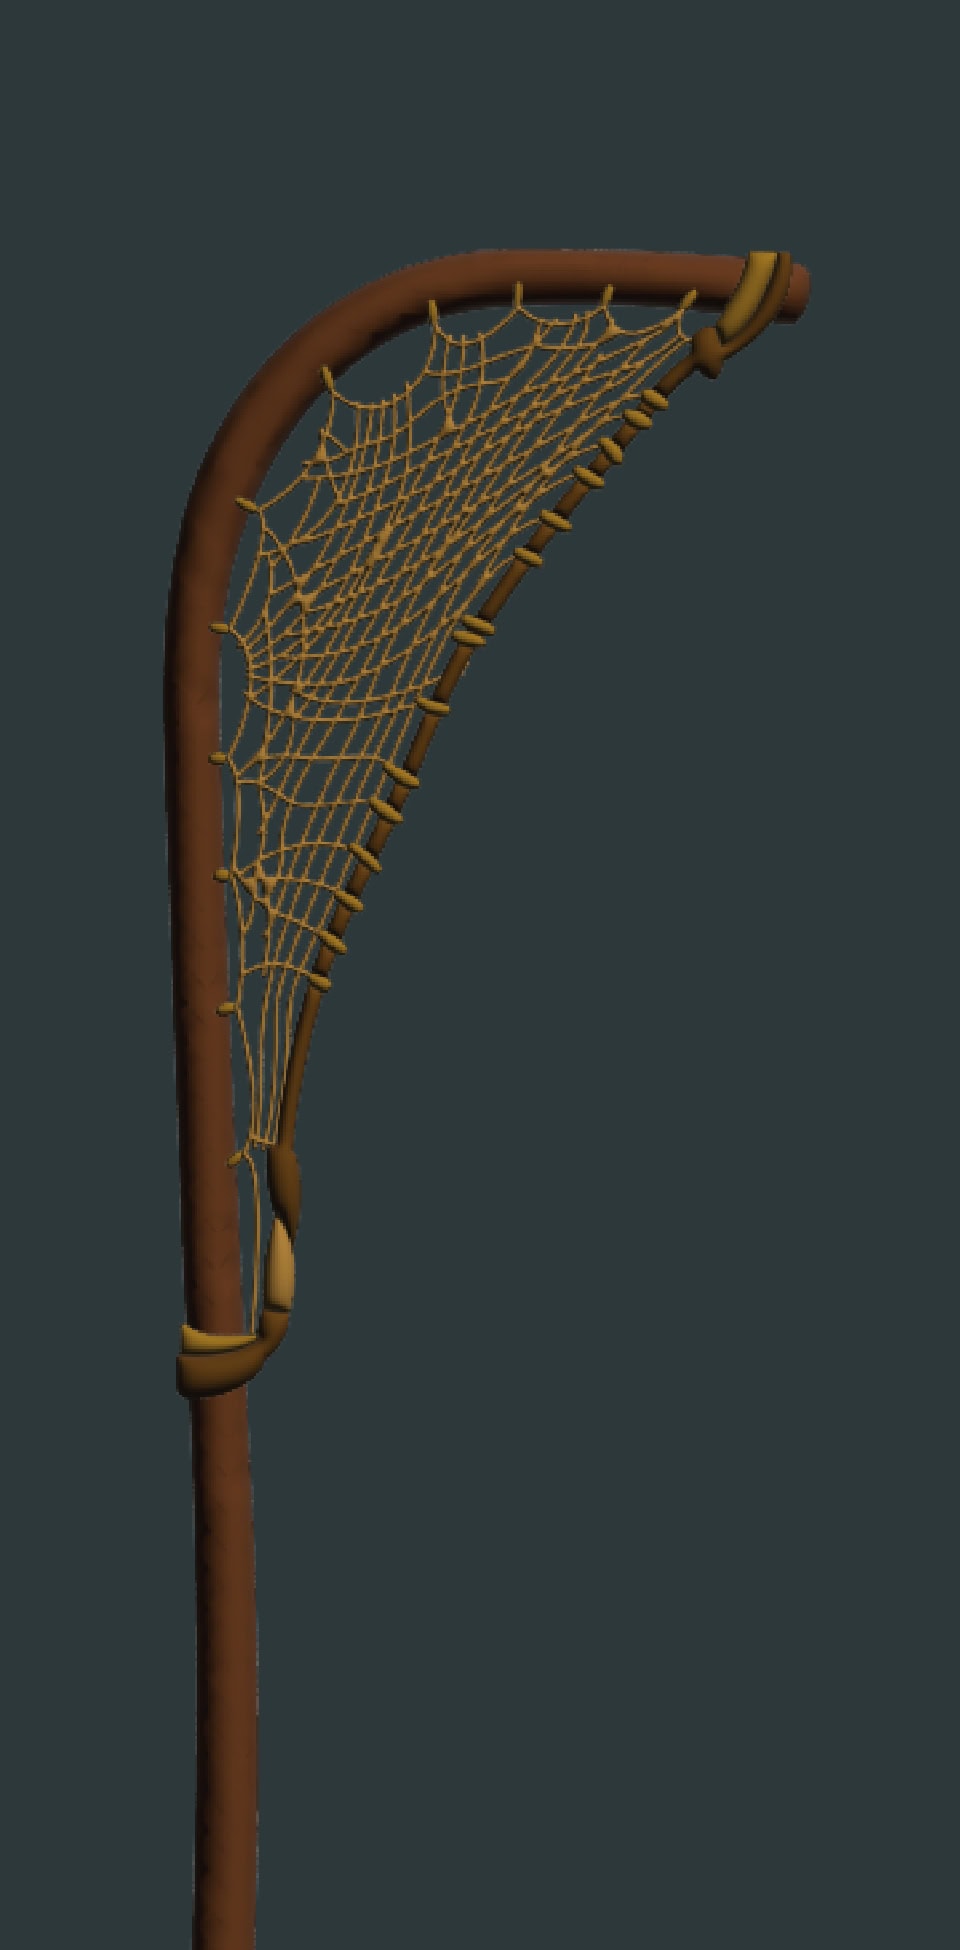 A traditional lacrosse stick, representing distinct Indigenous Nations